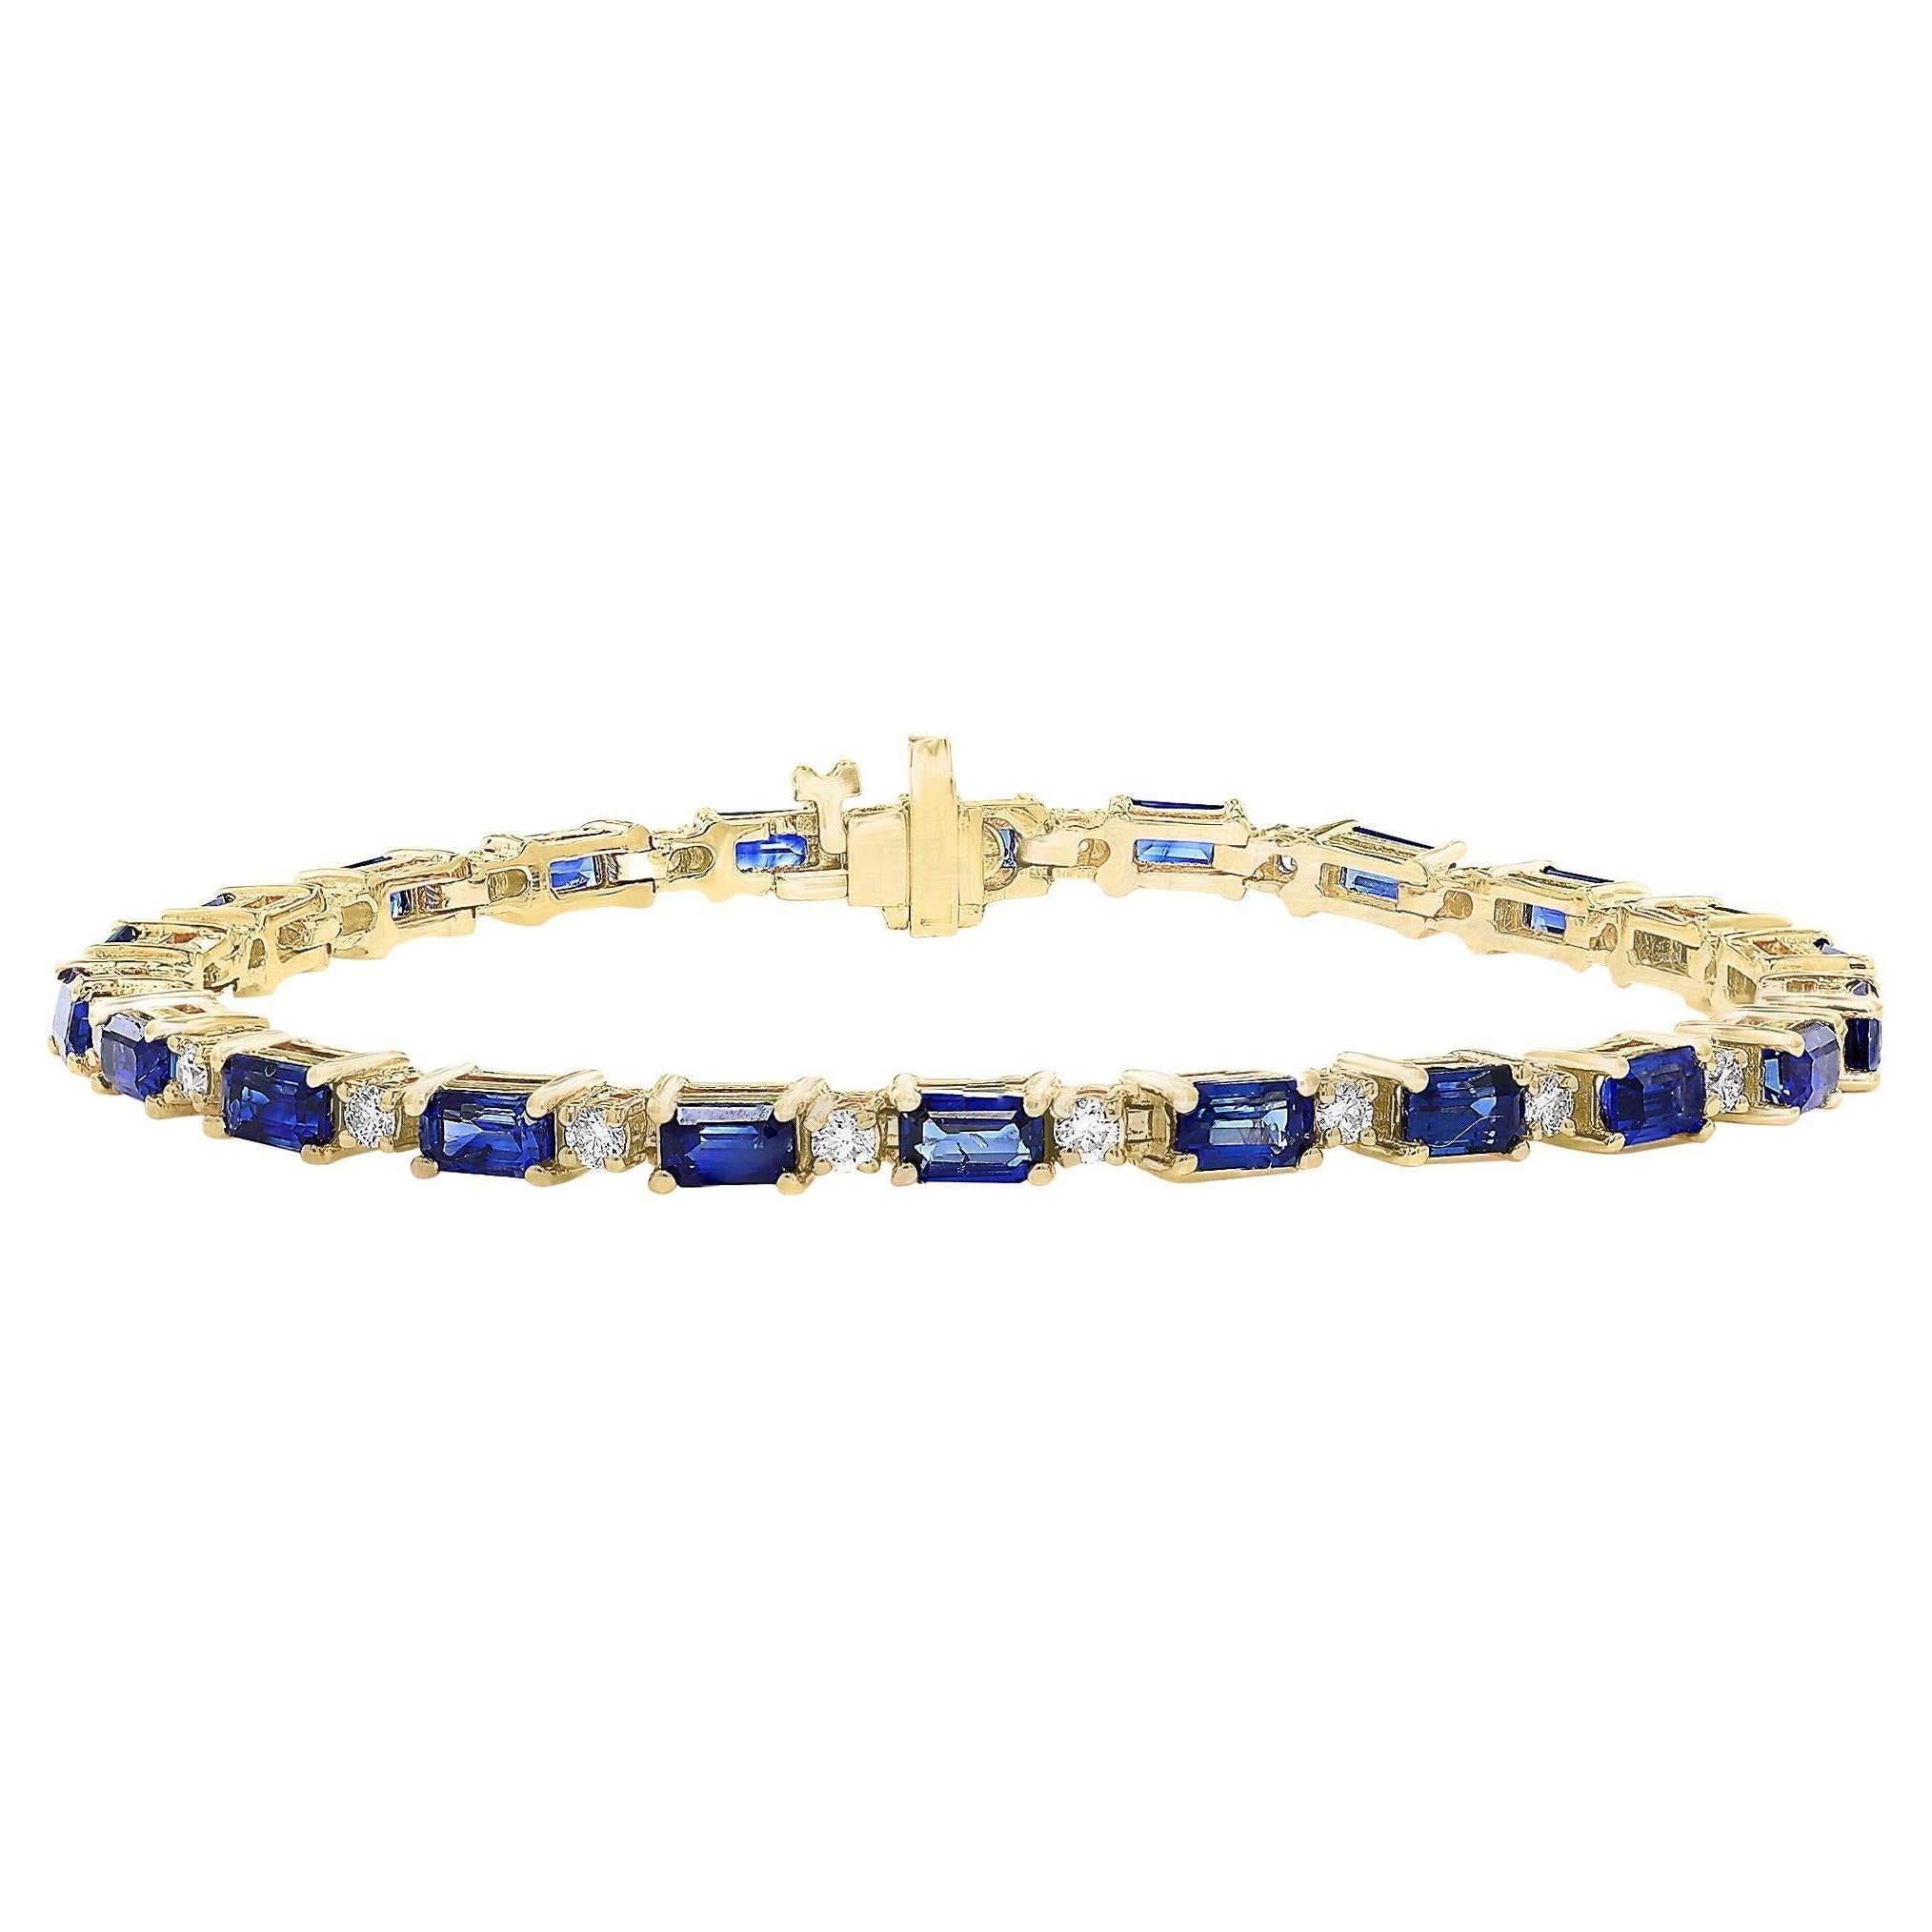 8.99 Carat Emerald Cut Blue Sapphire and Diamond Bracelet in 14K White Gold For Sale